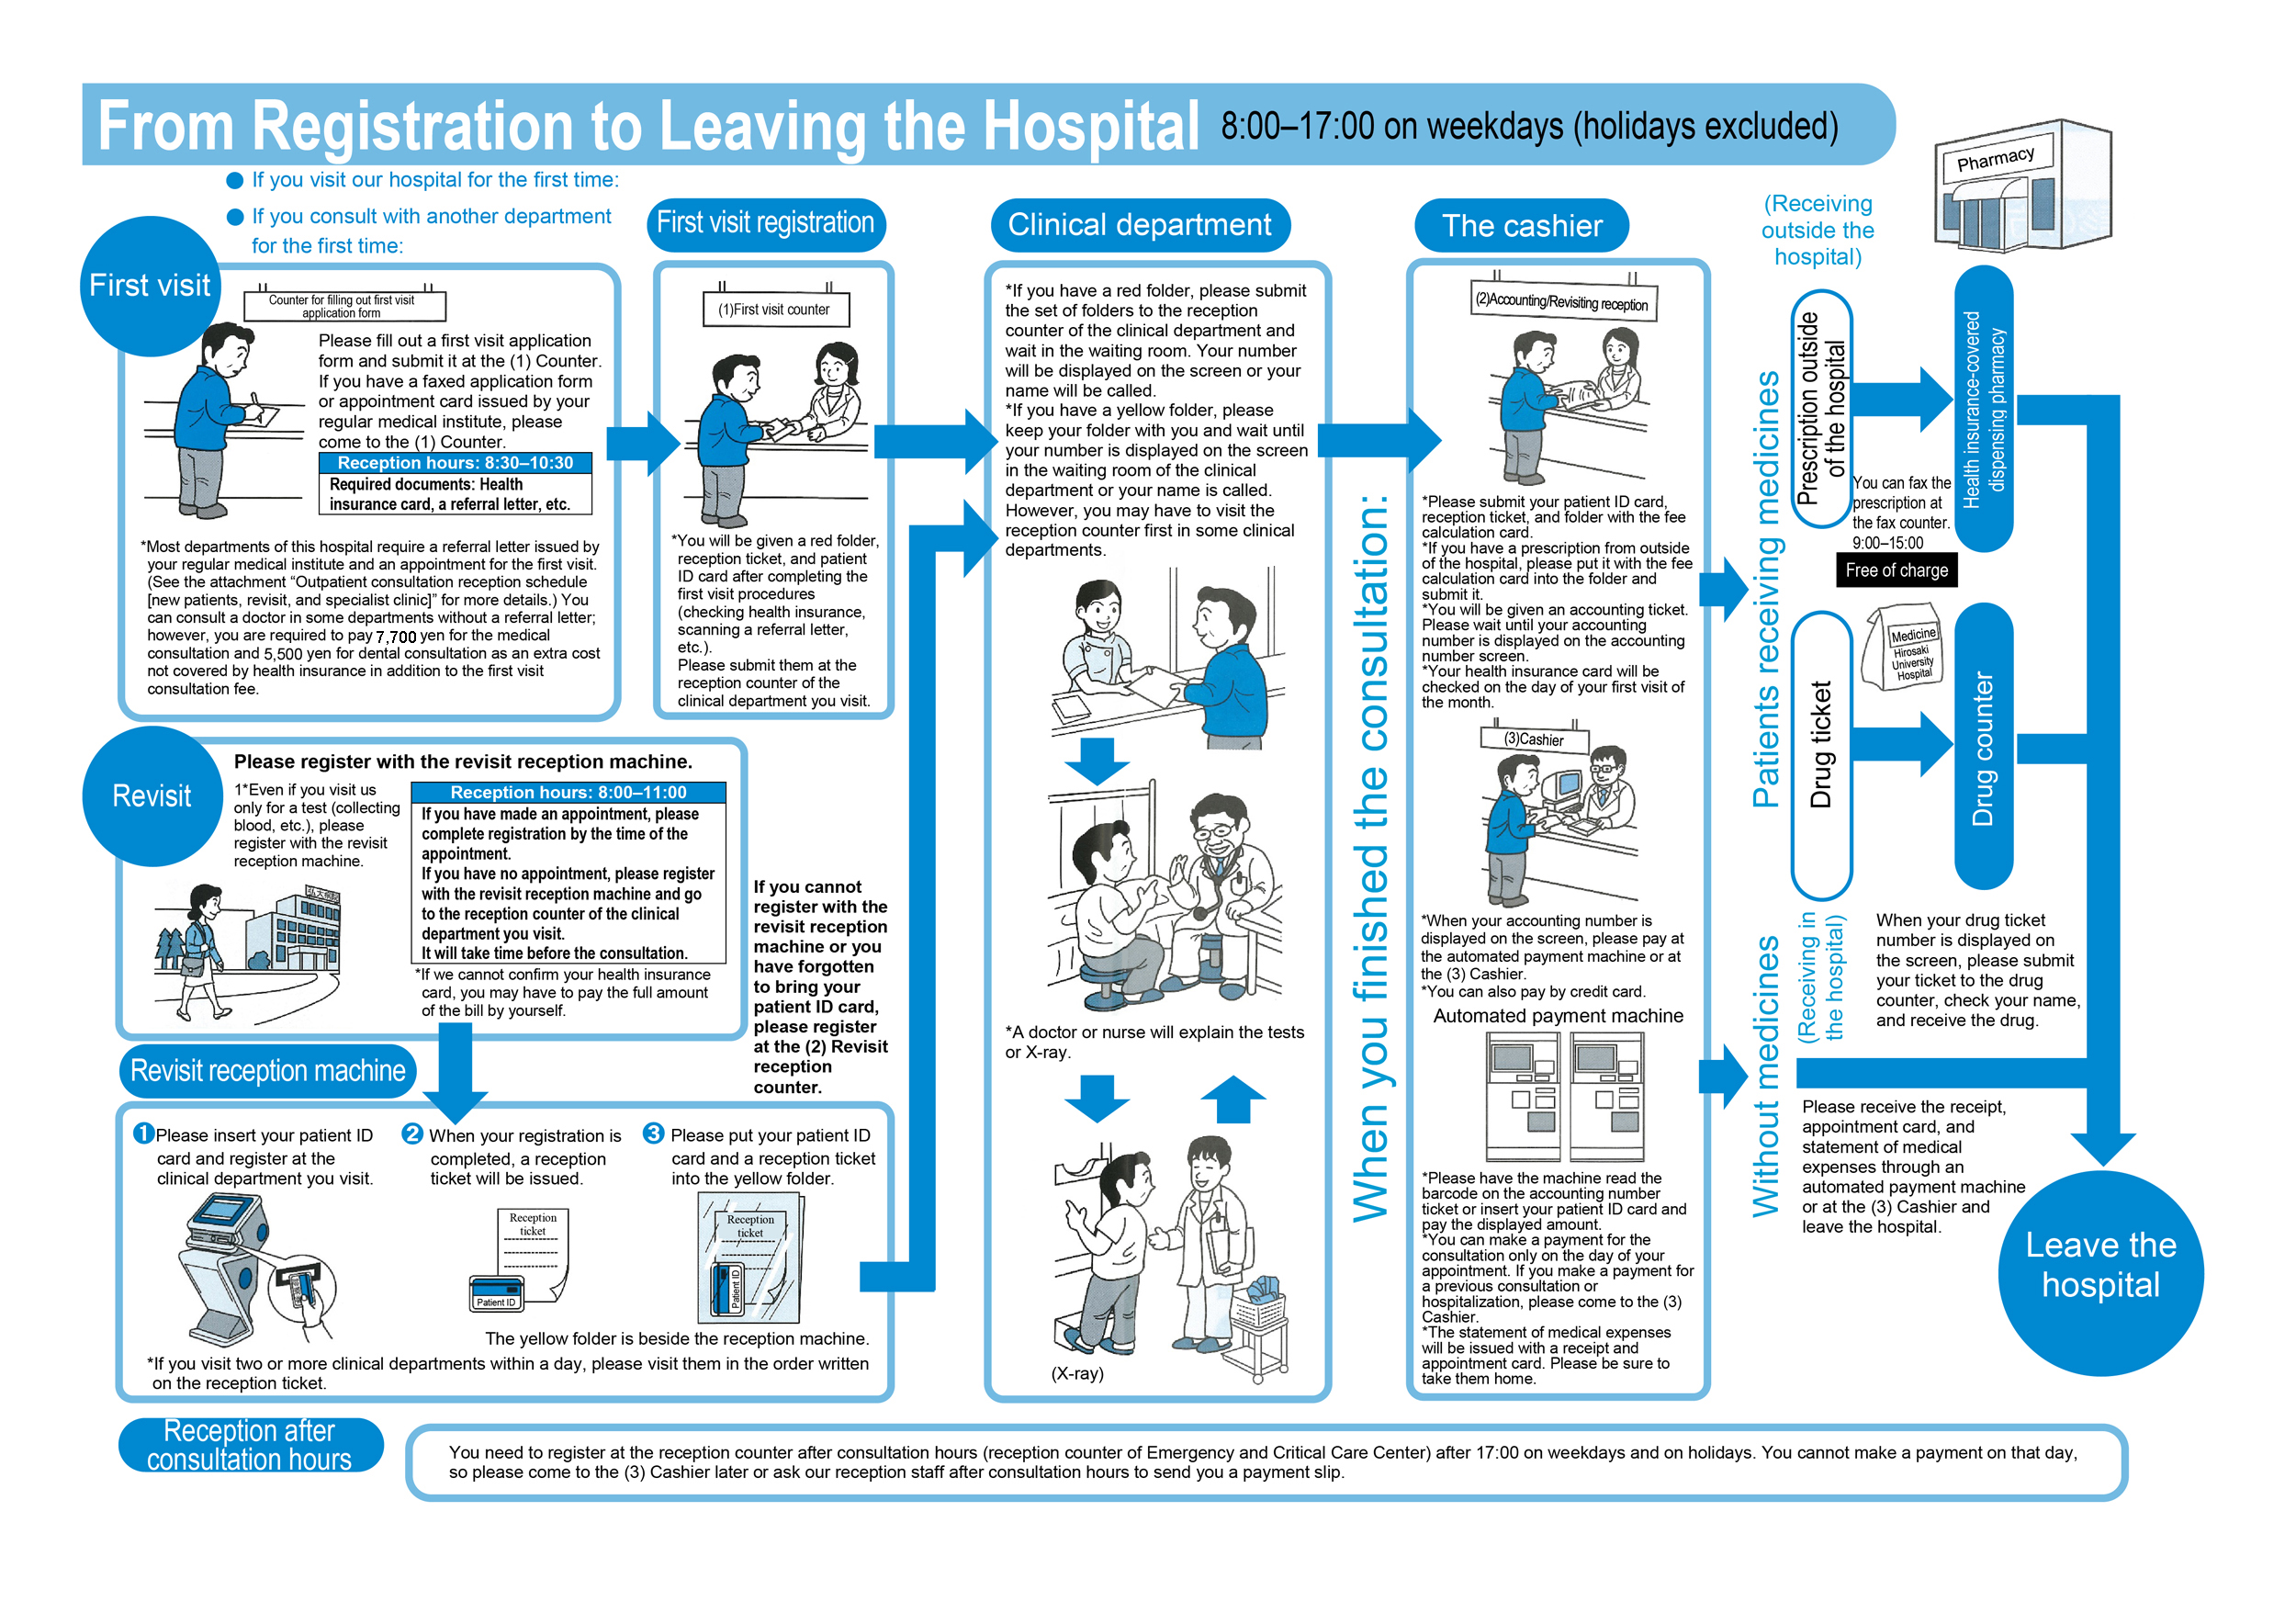 PDF for 'From Registration to Leaving the Hospital'